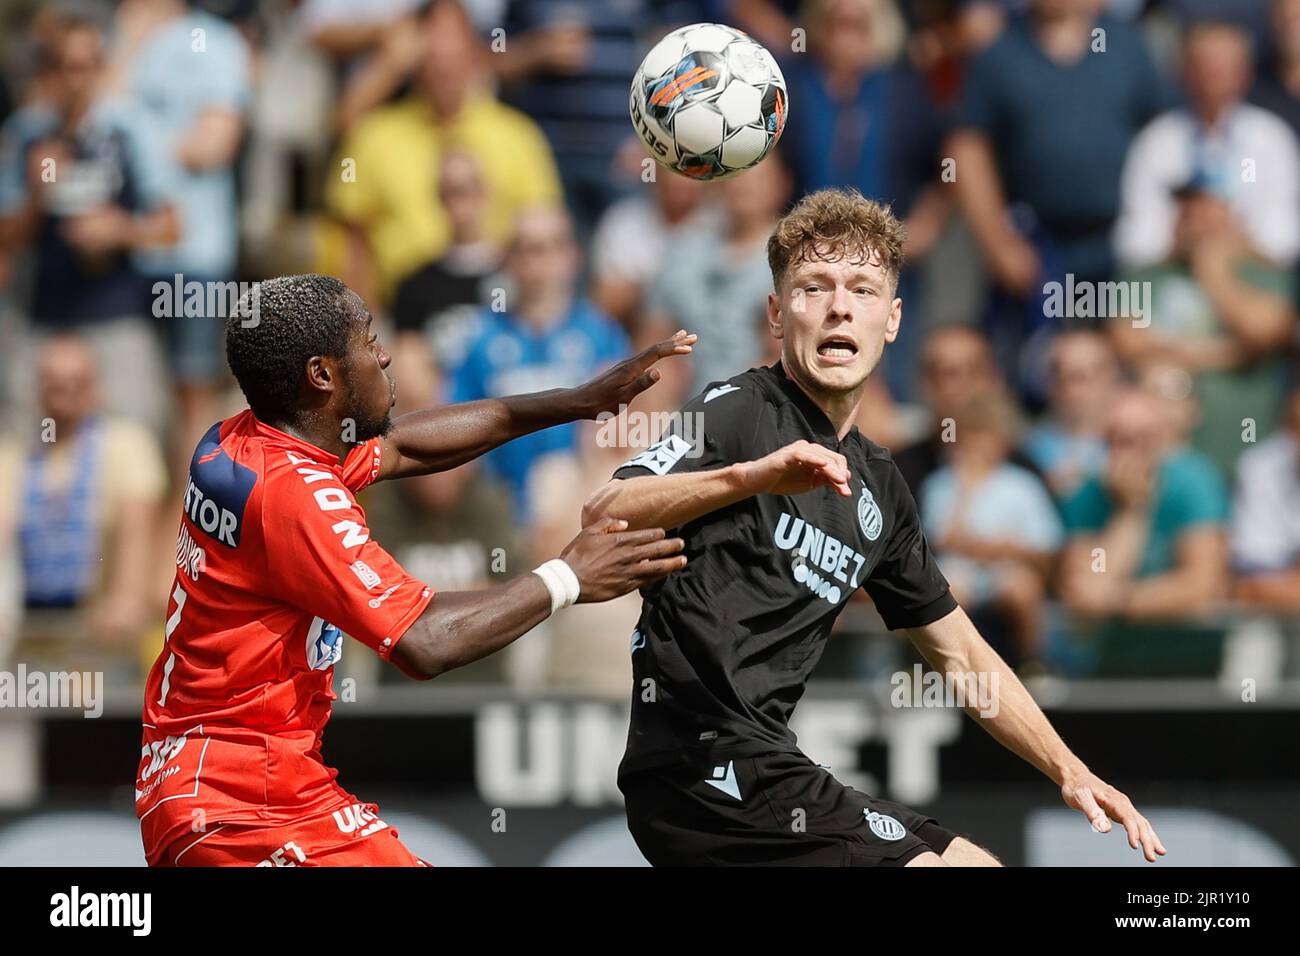 Brugge, Belgium, 21 August 2022, Kortrijk's Dylan Mbayo and Club's Andreas Skov Olsen fight for the ball during a soccer match between Club Brugge and KV Kortrijk, Sunday 21 August 2022 in Brugge, on day 5 of the 2022-2023 'Jupiler Pro League' first division of the Belgian championship. BELGA PHOTO BRUNO FAHY Stock Photo